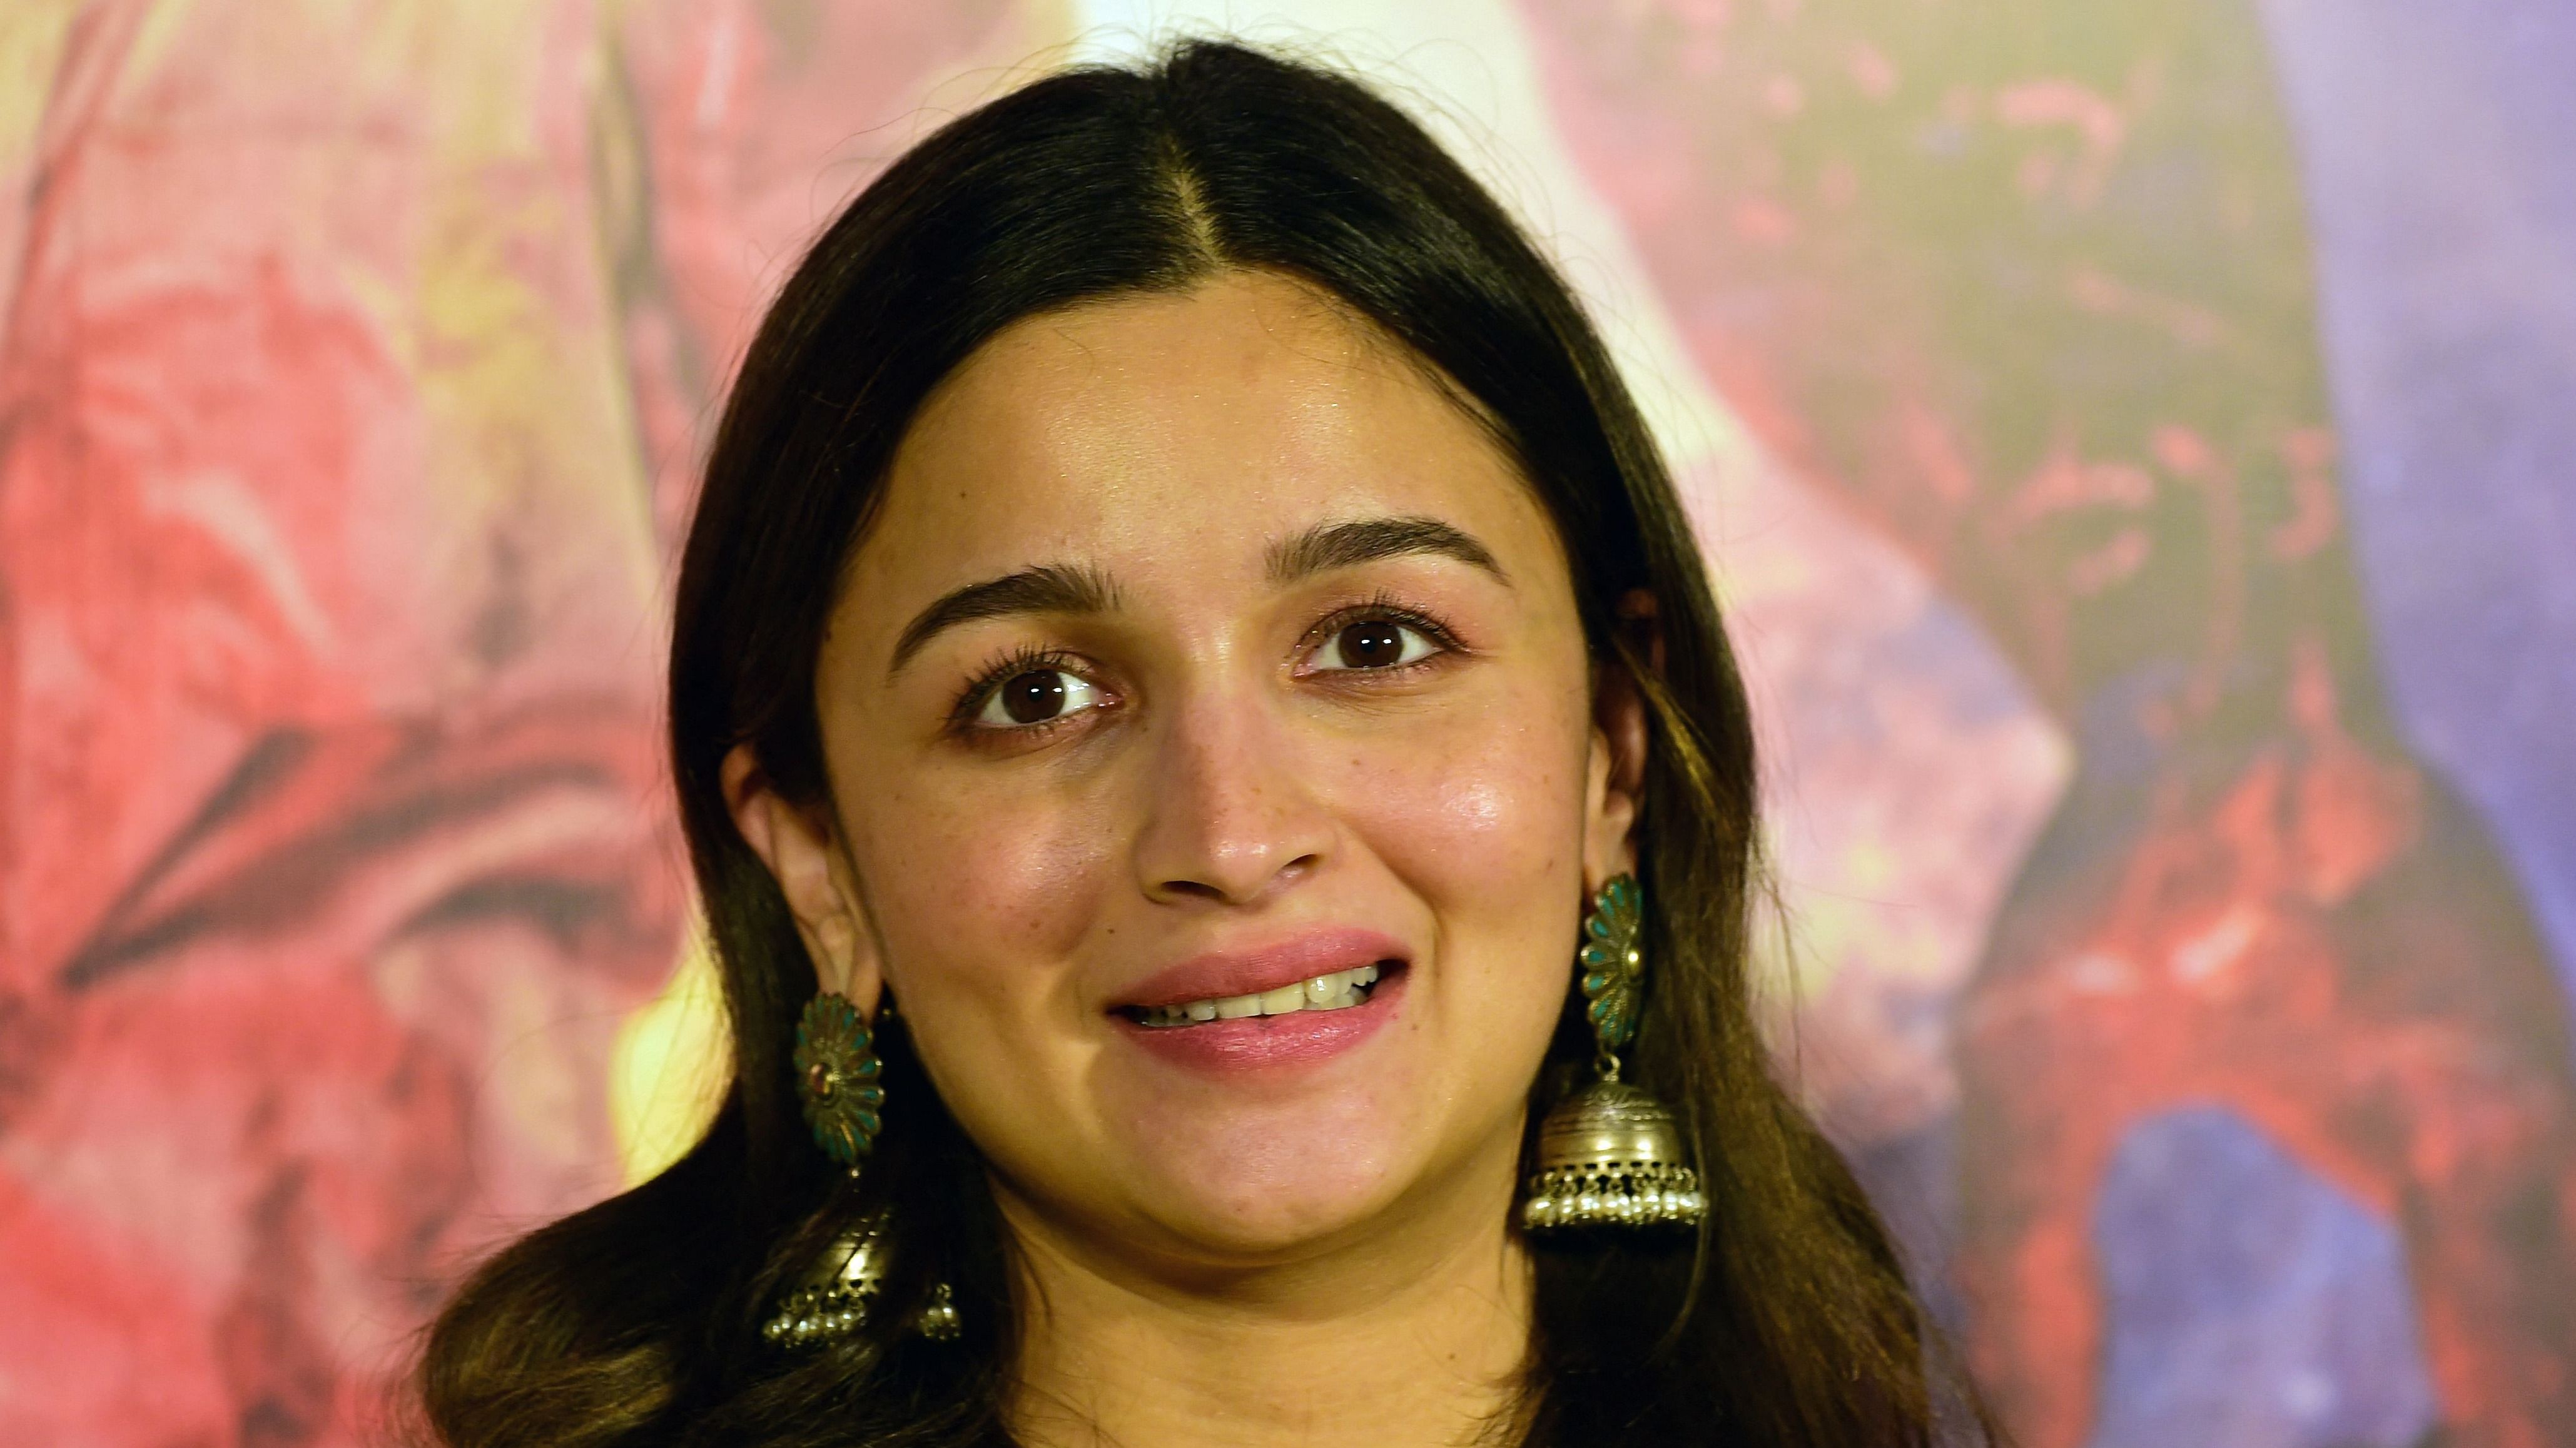 The way Brahmastra has "set the box office on fire" since its release, it is evident that the film is going in the right direction, she added. Credit: AFP Photo